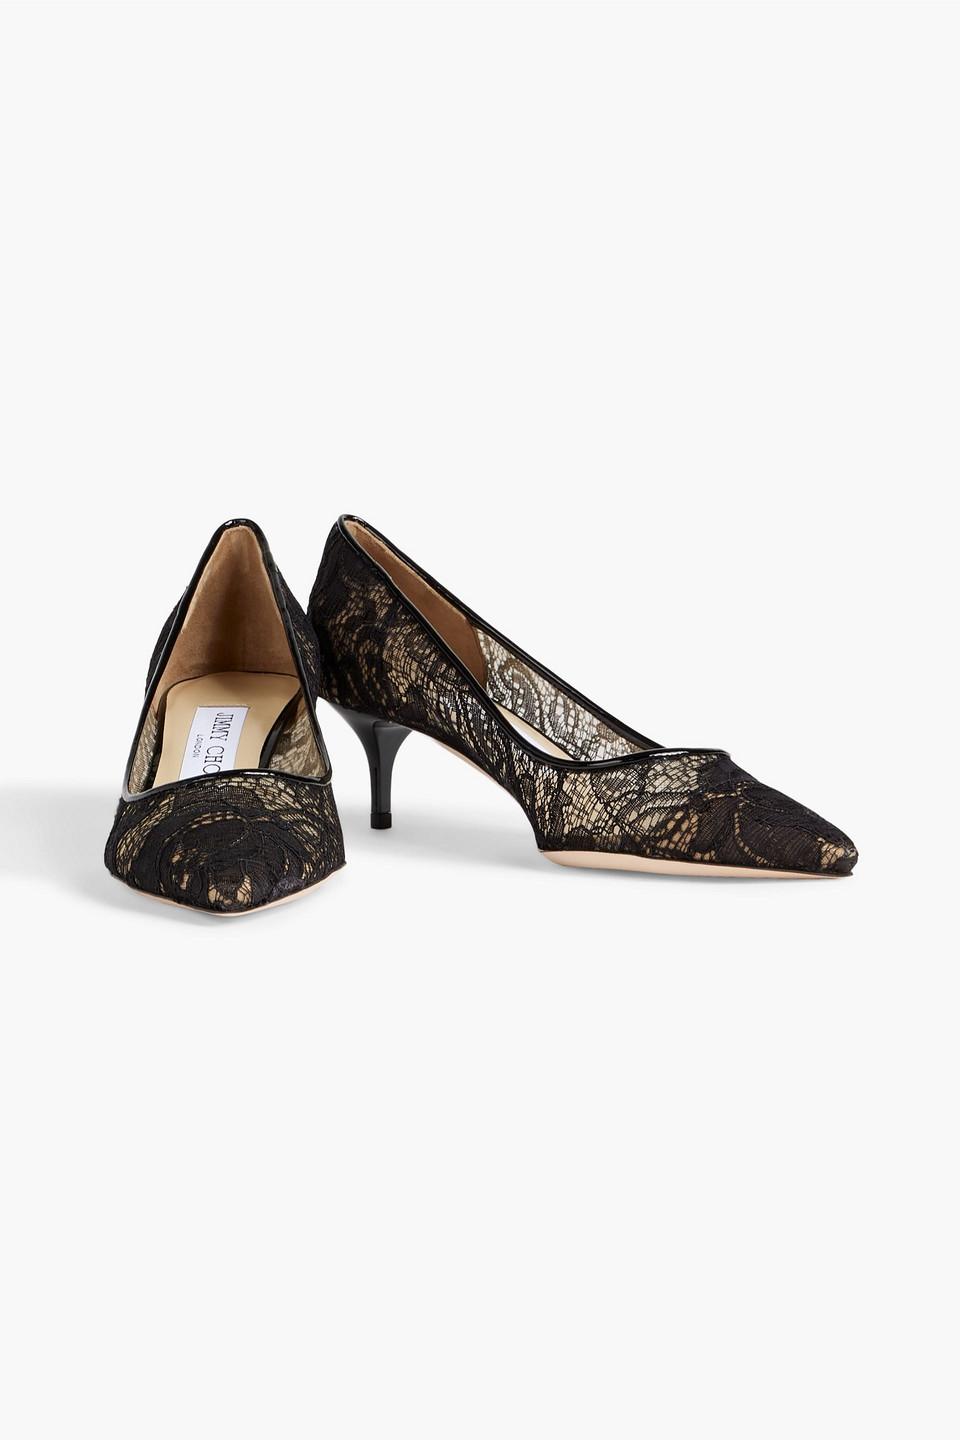 Jimmy Choo Aza Corded Lace Pumps in Black | Lyst